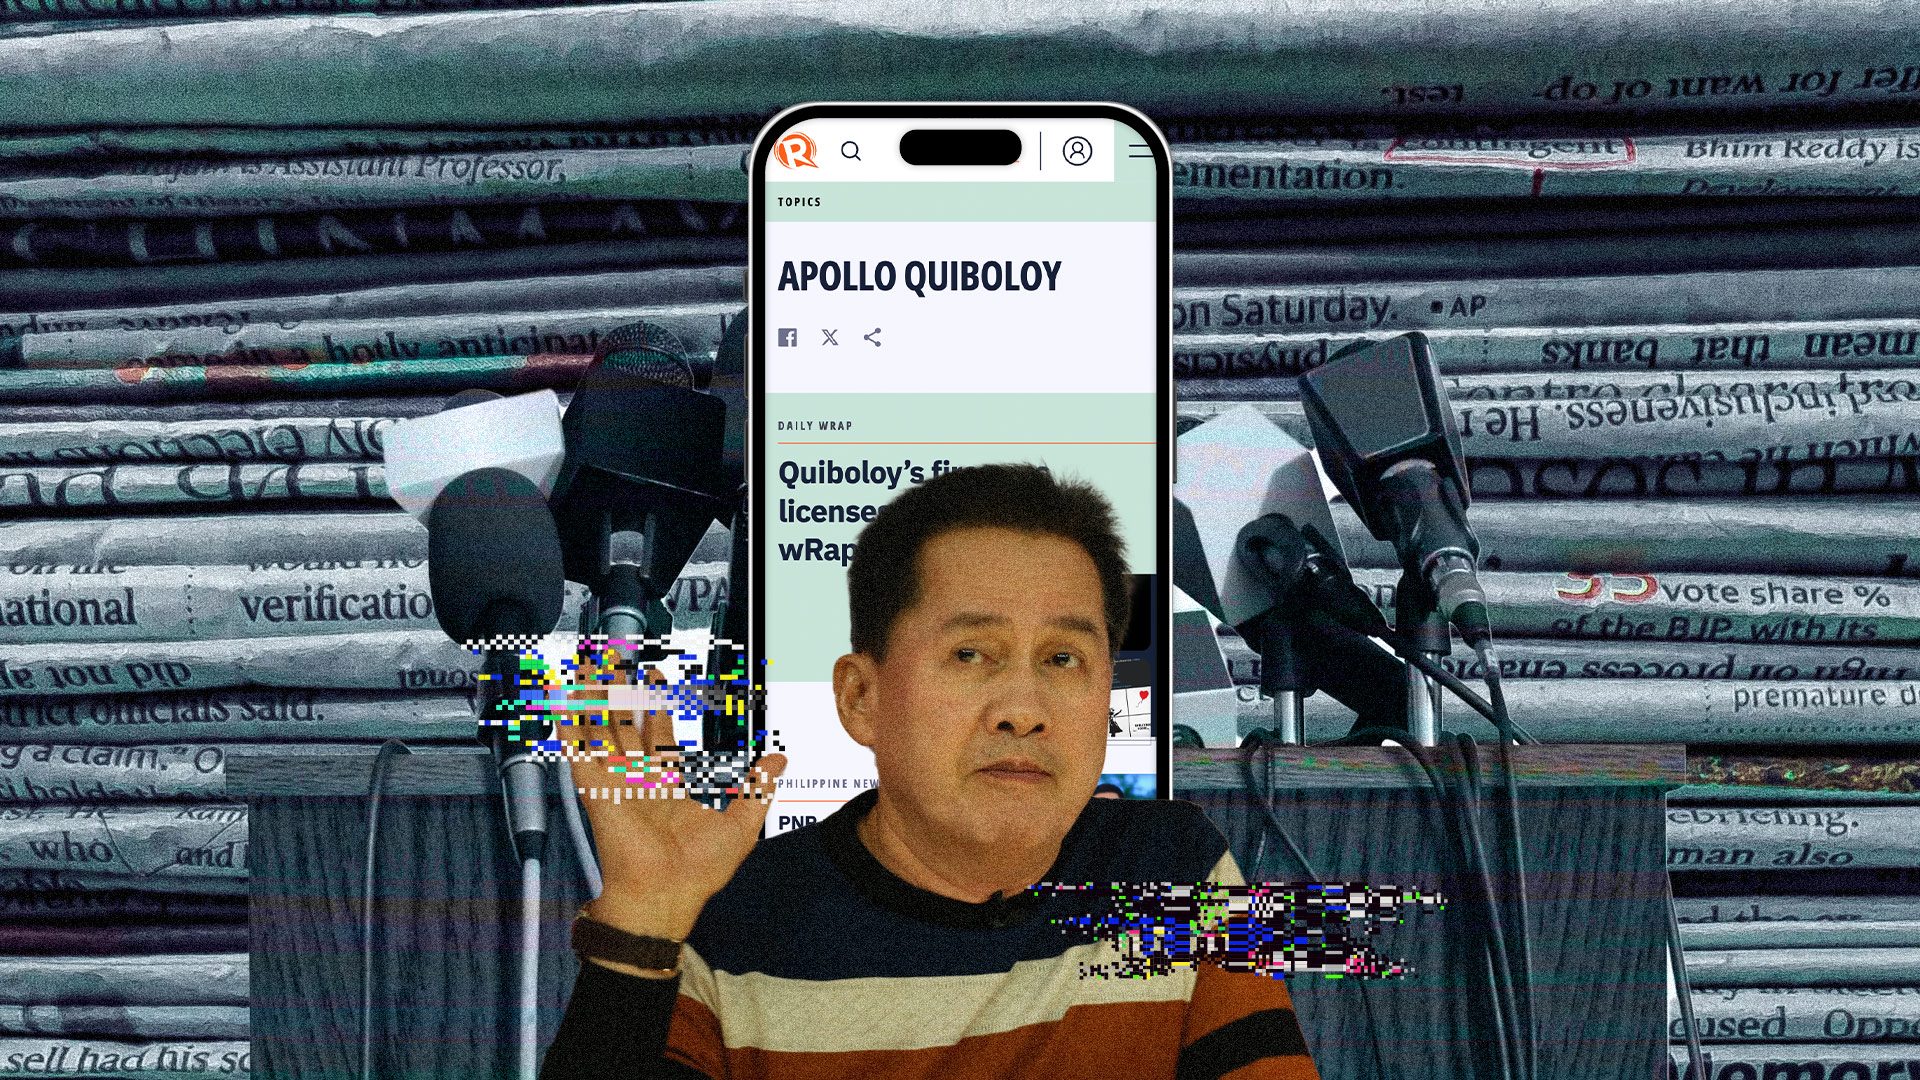 [Judgment Call] Who’s after Quiboloy? The media should be.